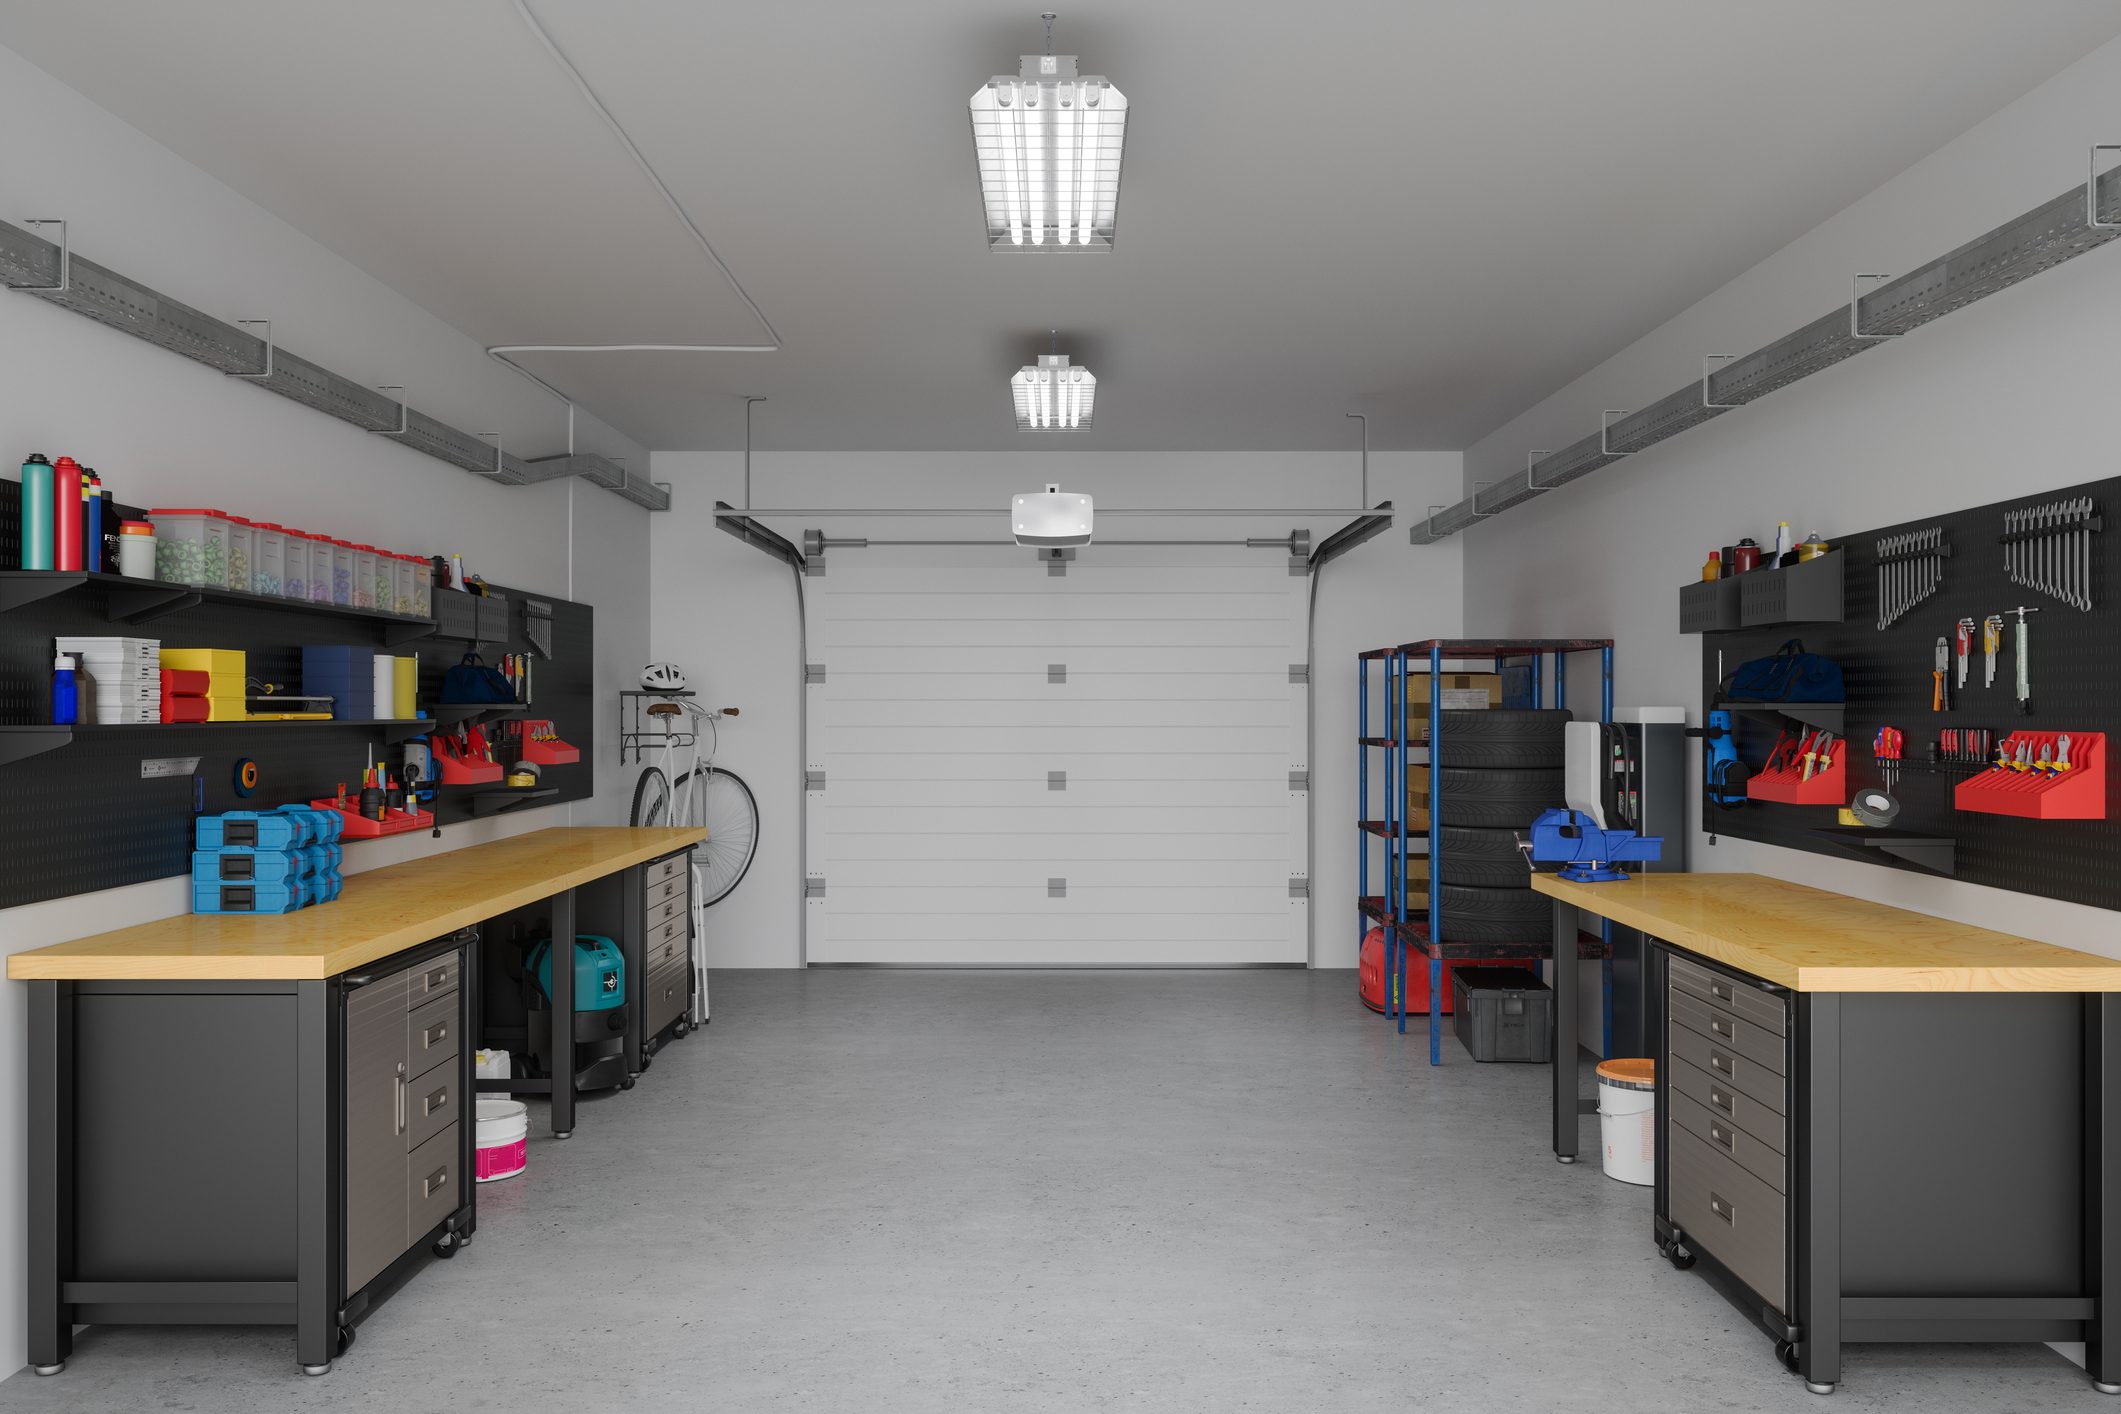 Shipping Containers vs Garages for Vehicle Storage - BigSteelBox